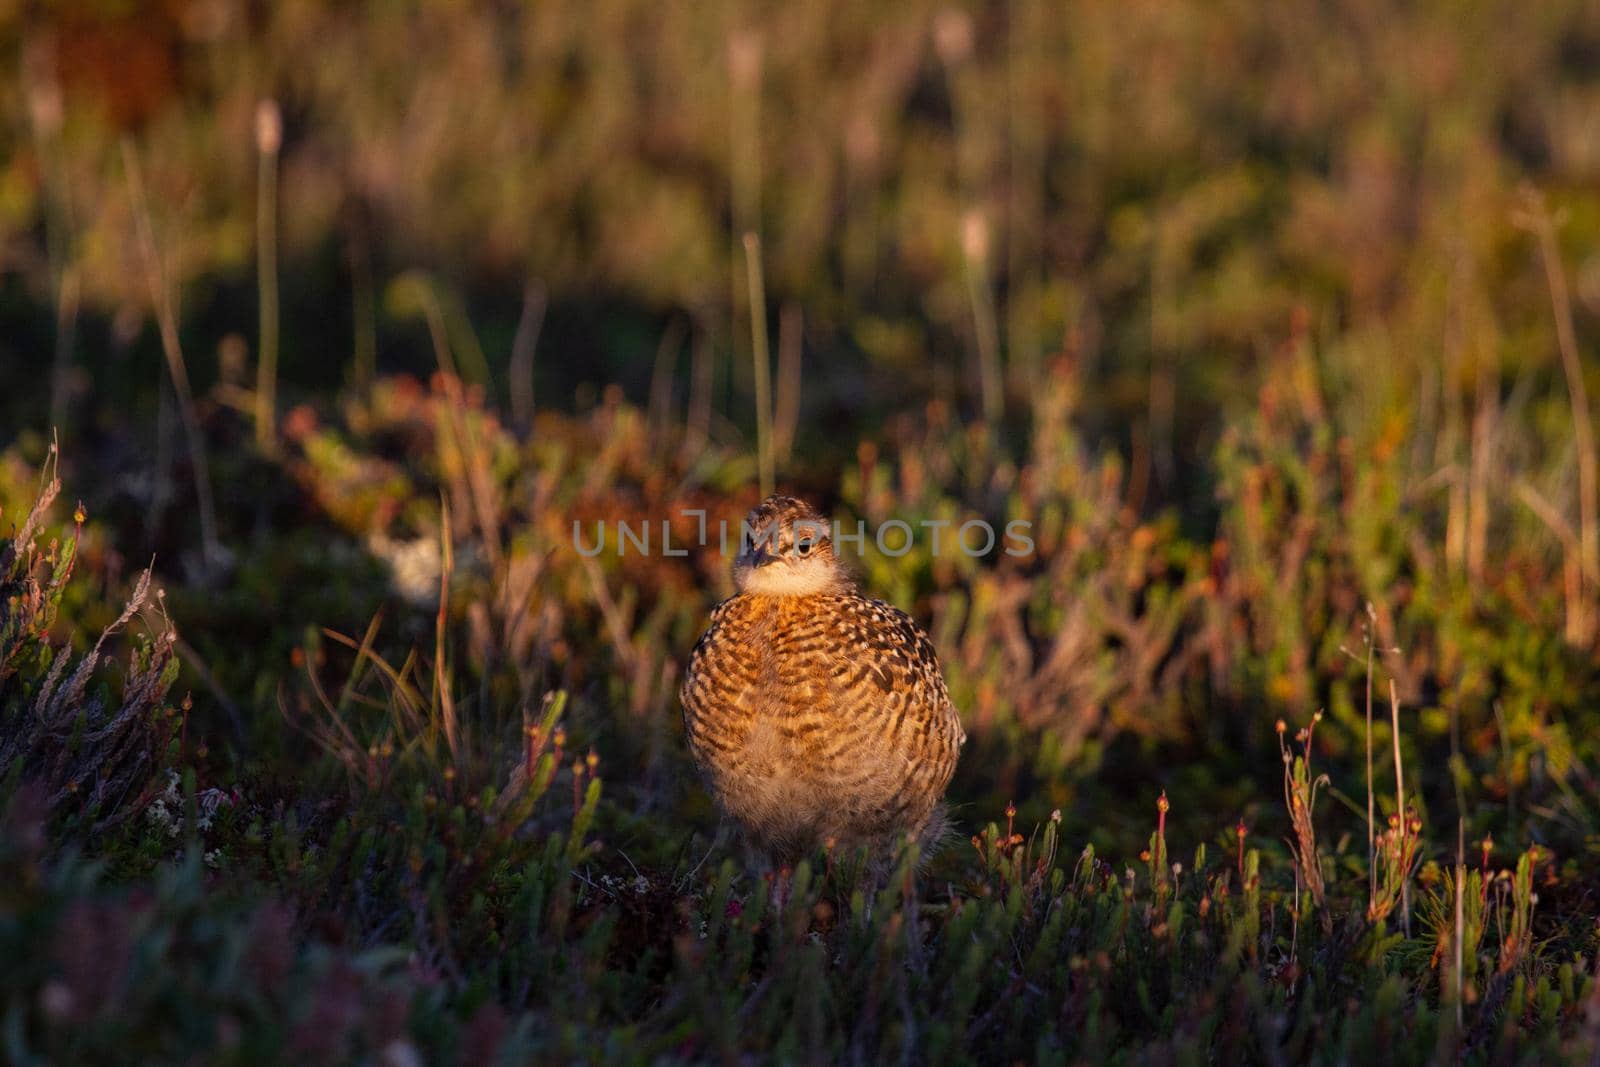 A young willow ptarmigan or grouse hiding among willows in Canada's arctic tundra. Near Arviat, Nunavut